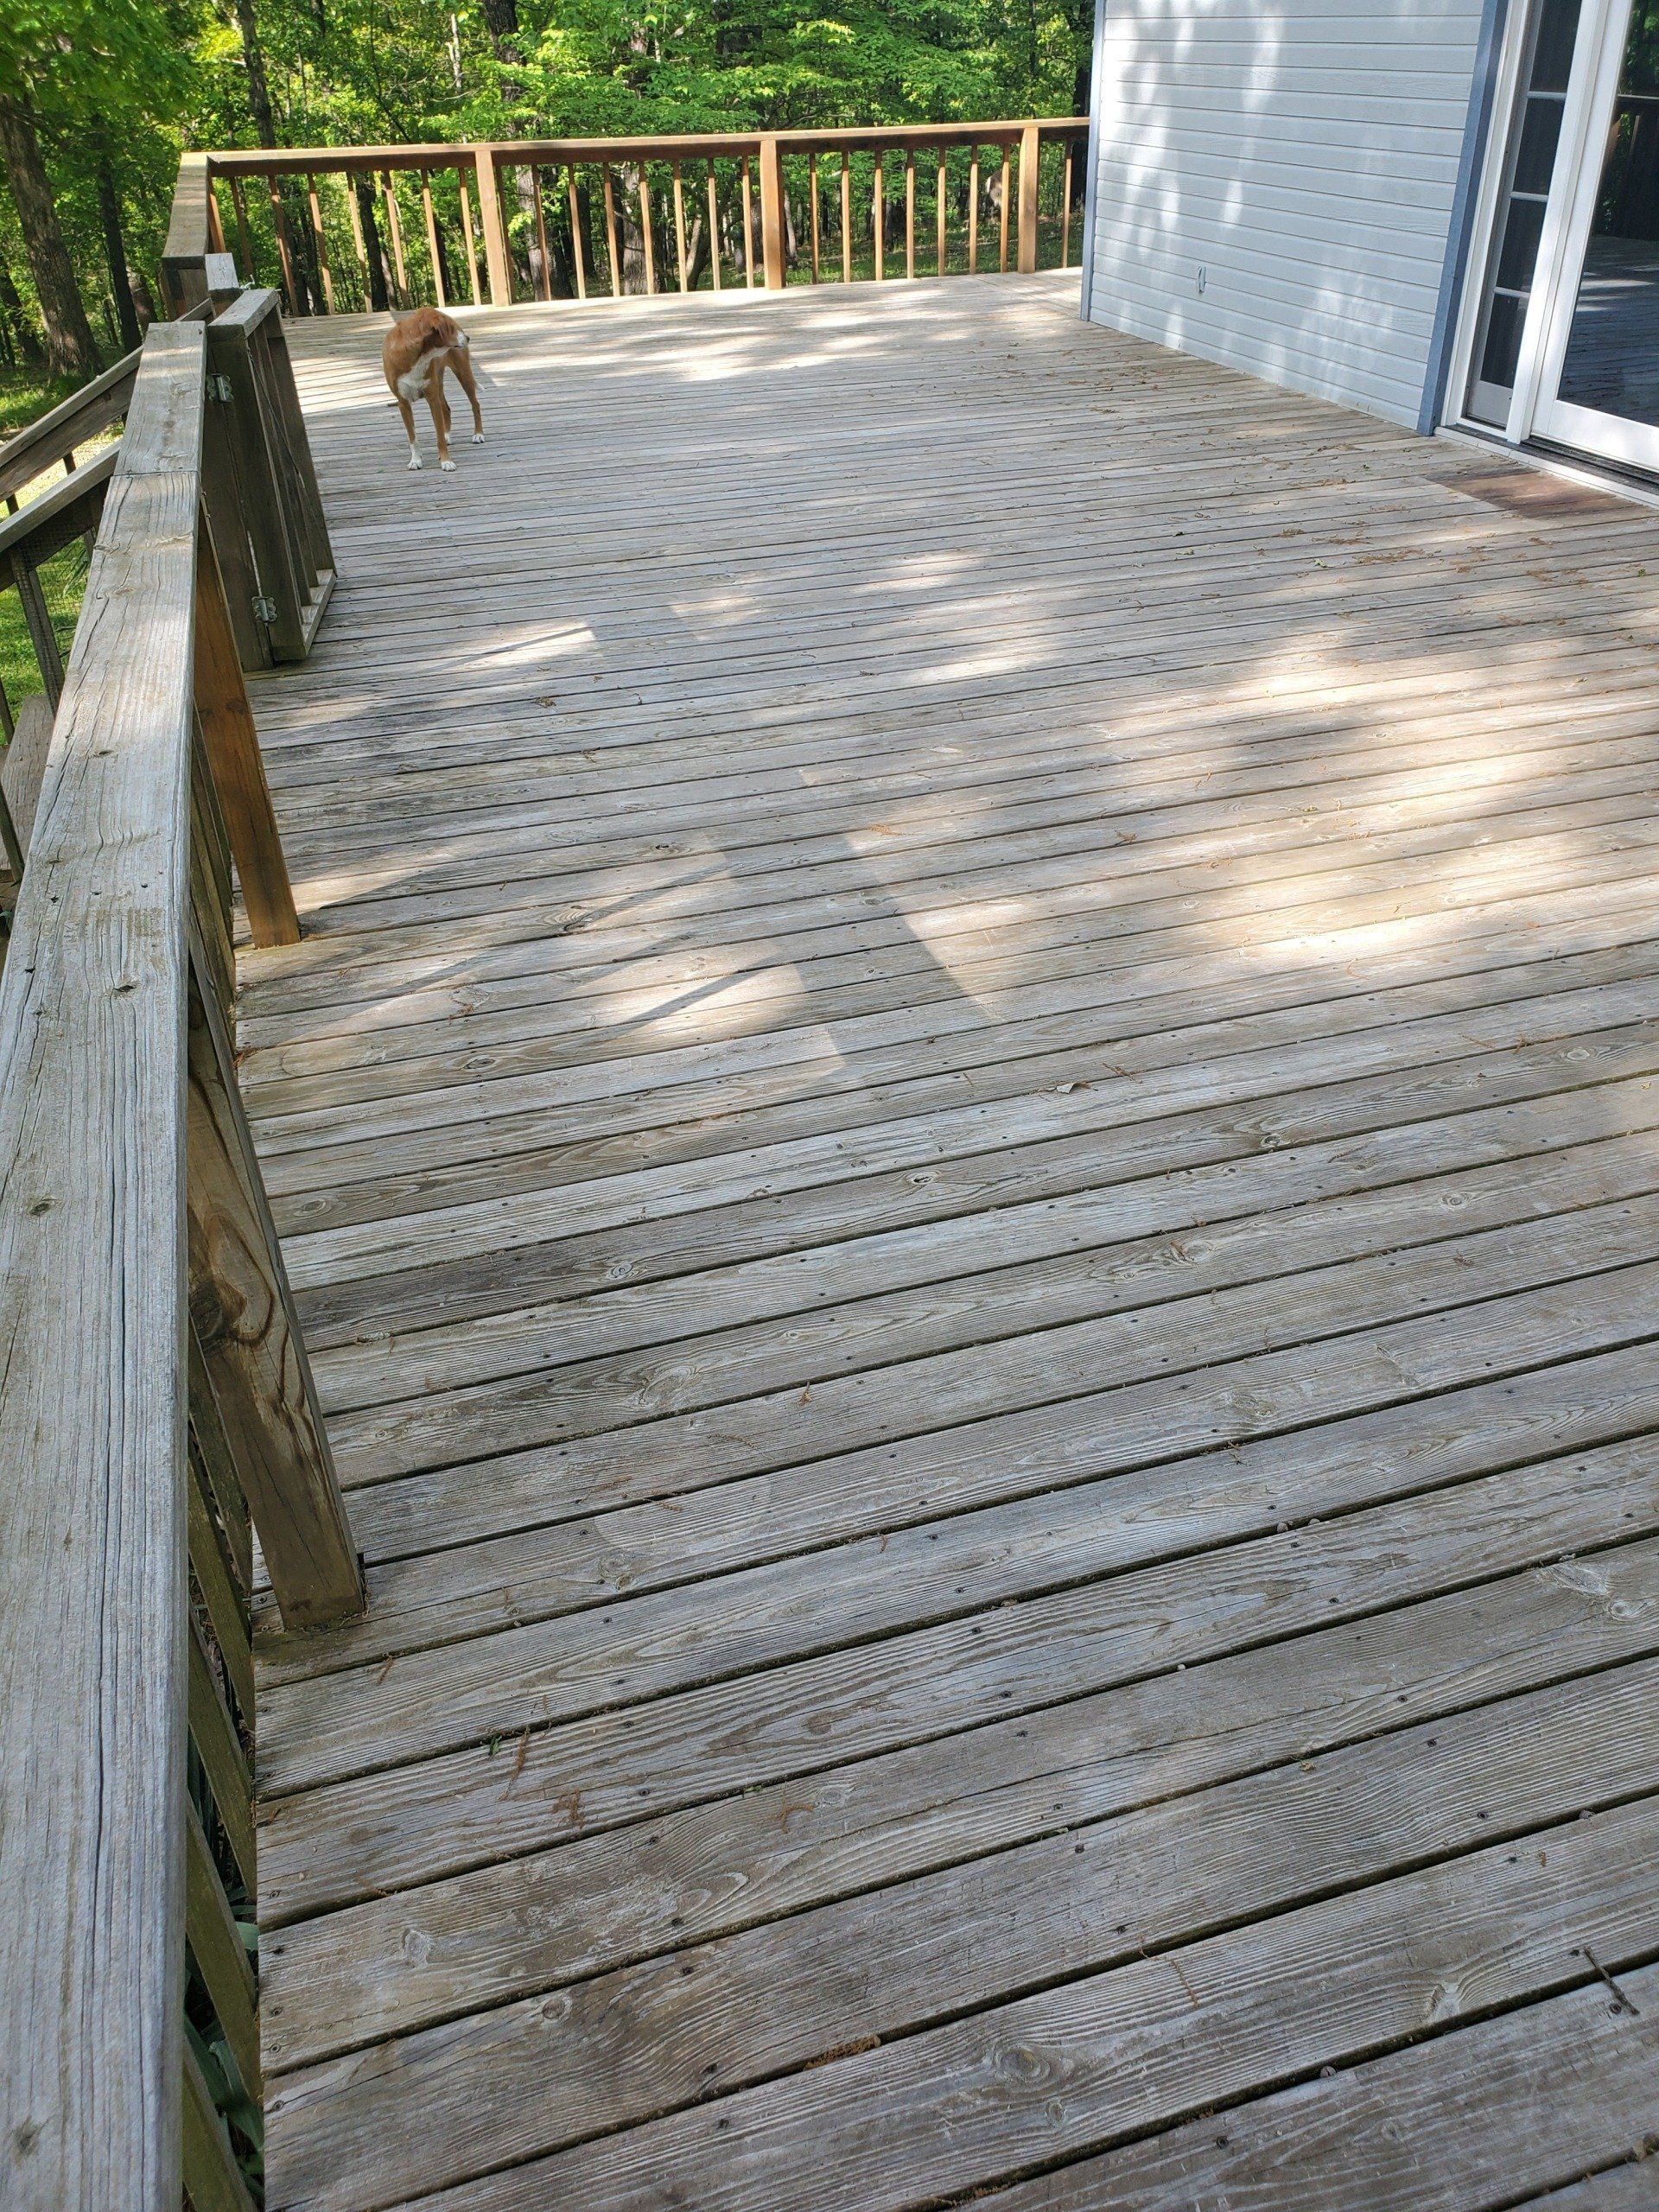 A dog is standing on a wooden deck next to a house.